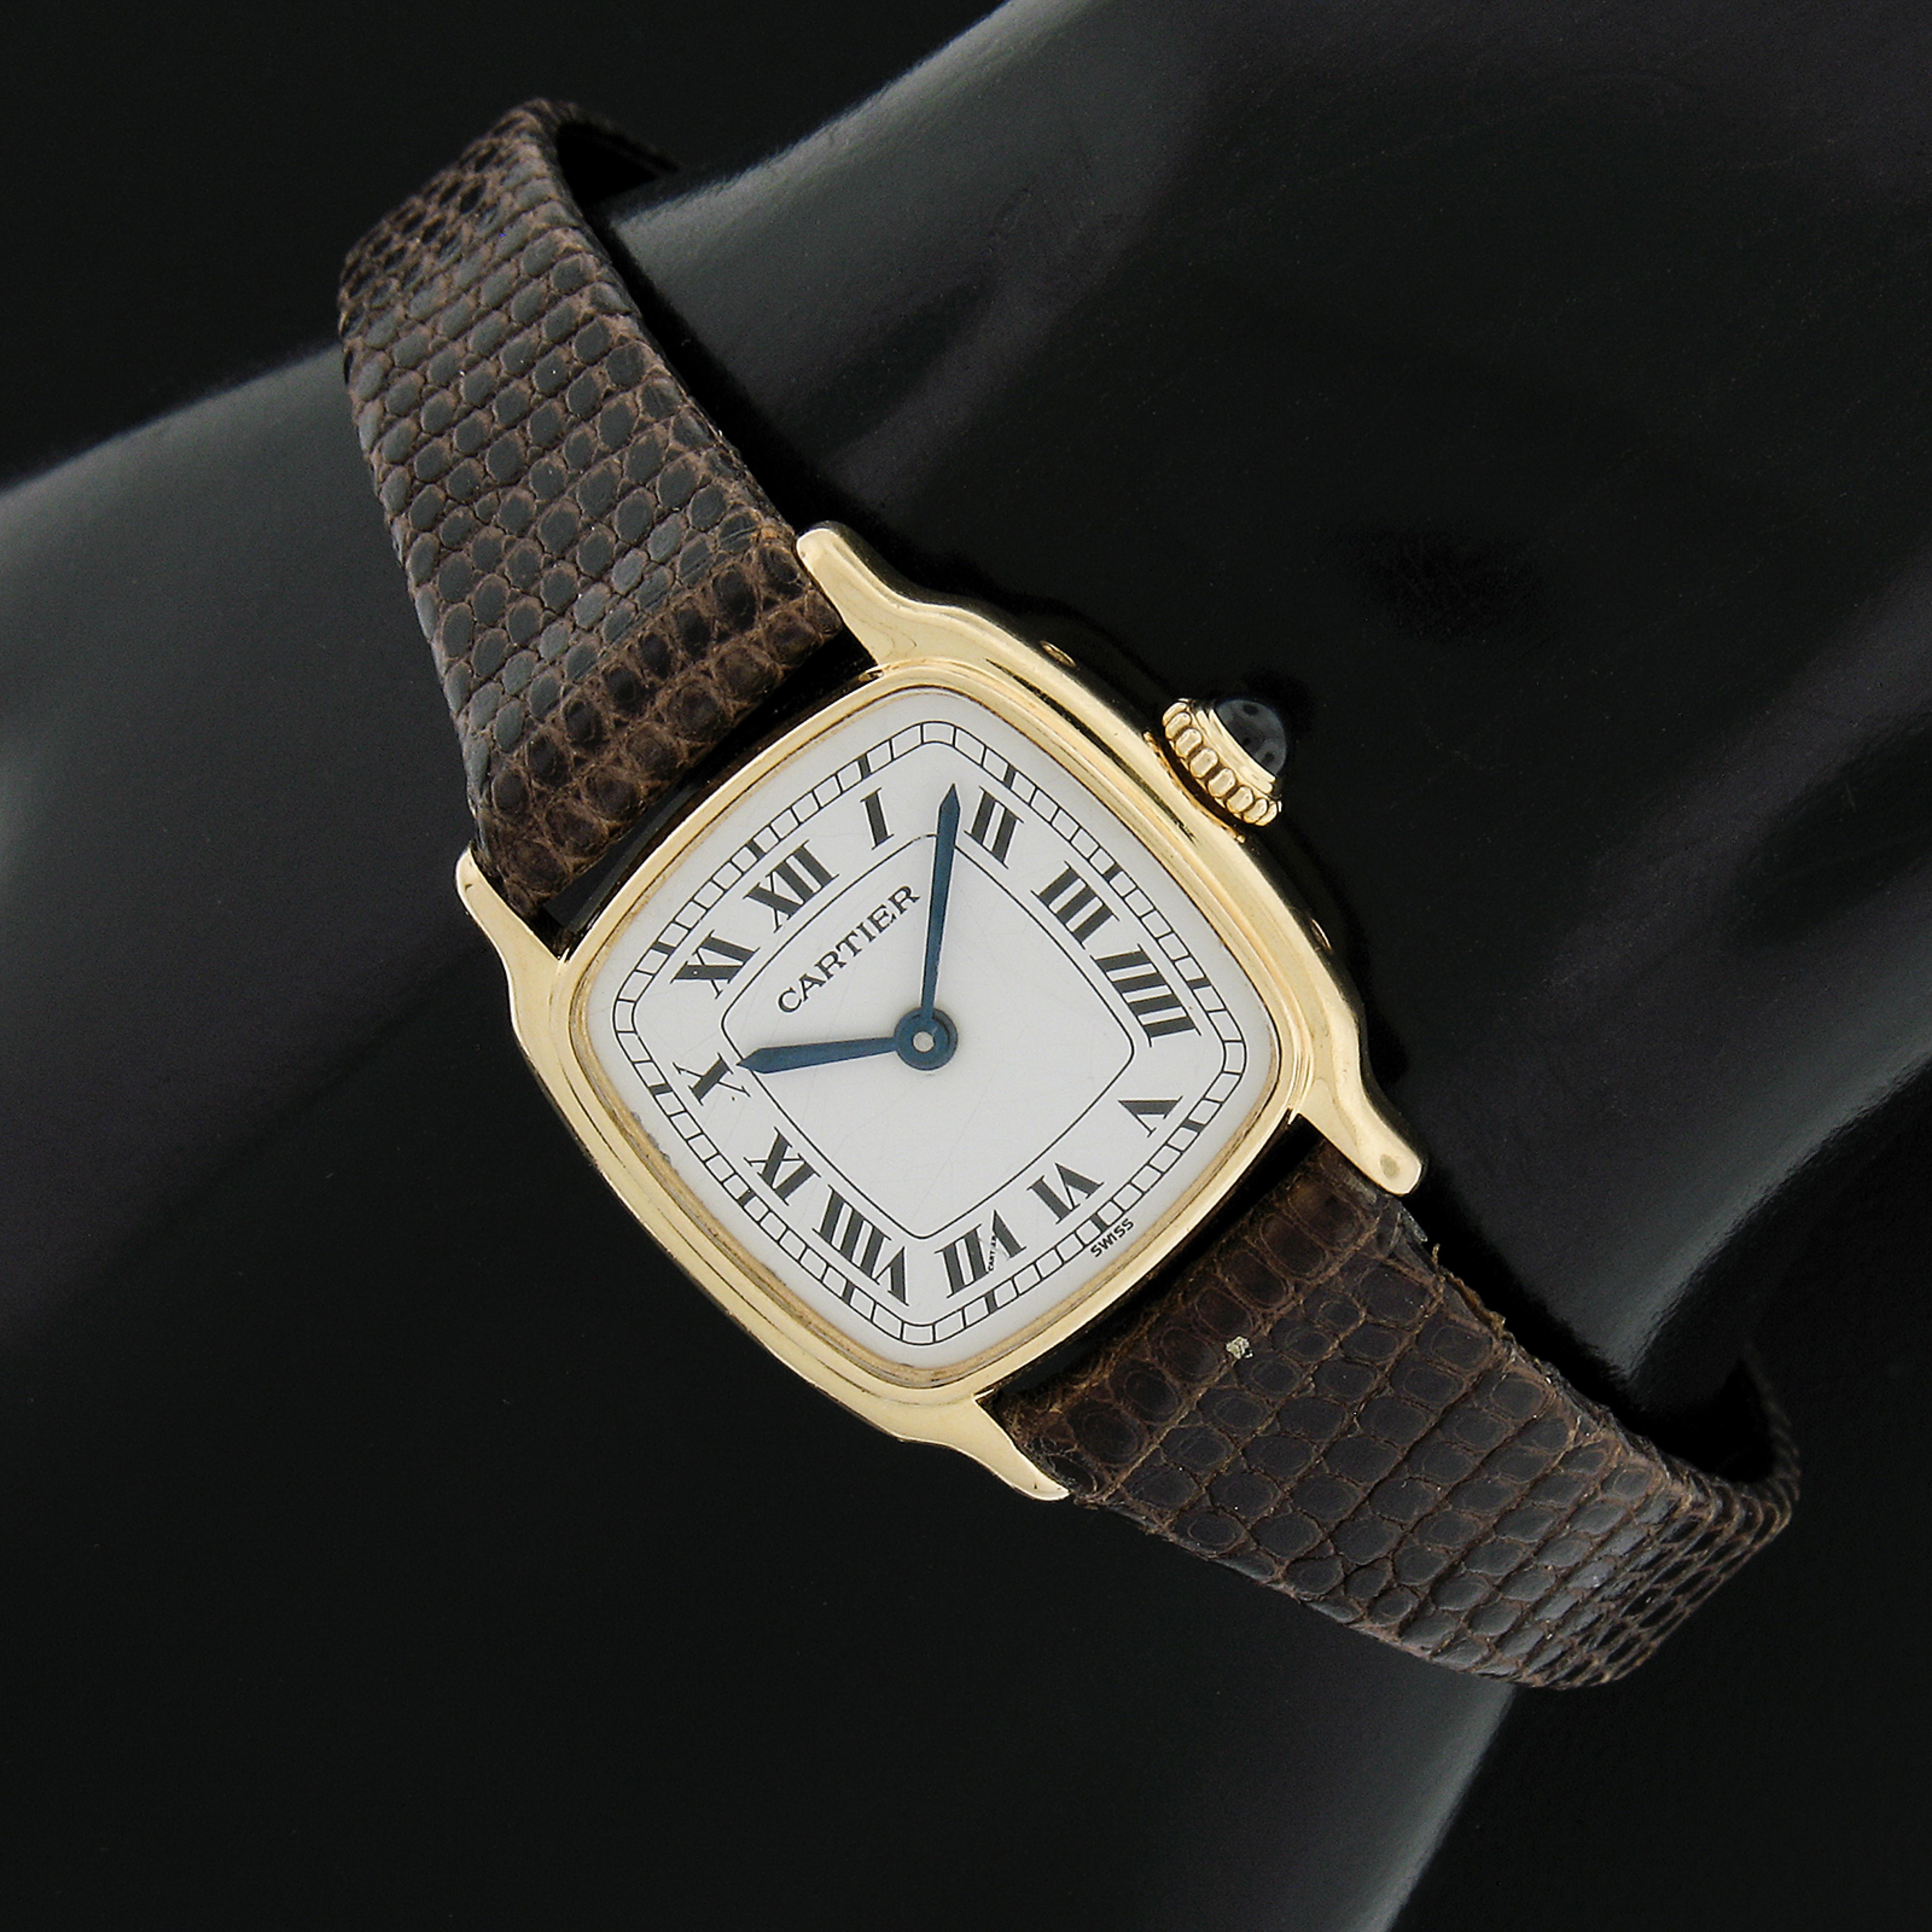 This beautiful classic vintage Cartier wrist watch features a mechanical hand wound Swiss movement mounted in an elegant, solid 18k yellow gold cushion shaped case. The watch comes with an aftermarket genuine lizard skin strap and a gold toned